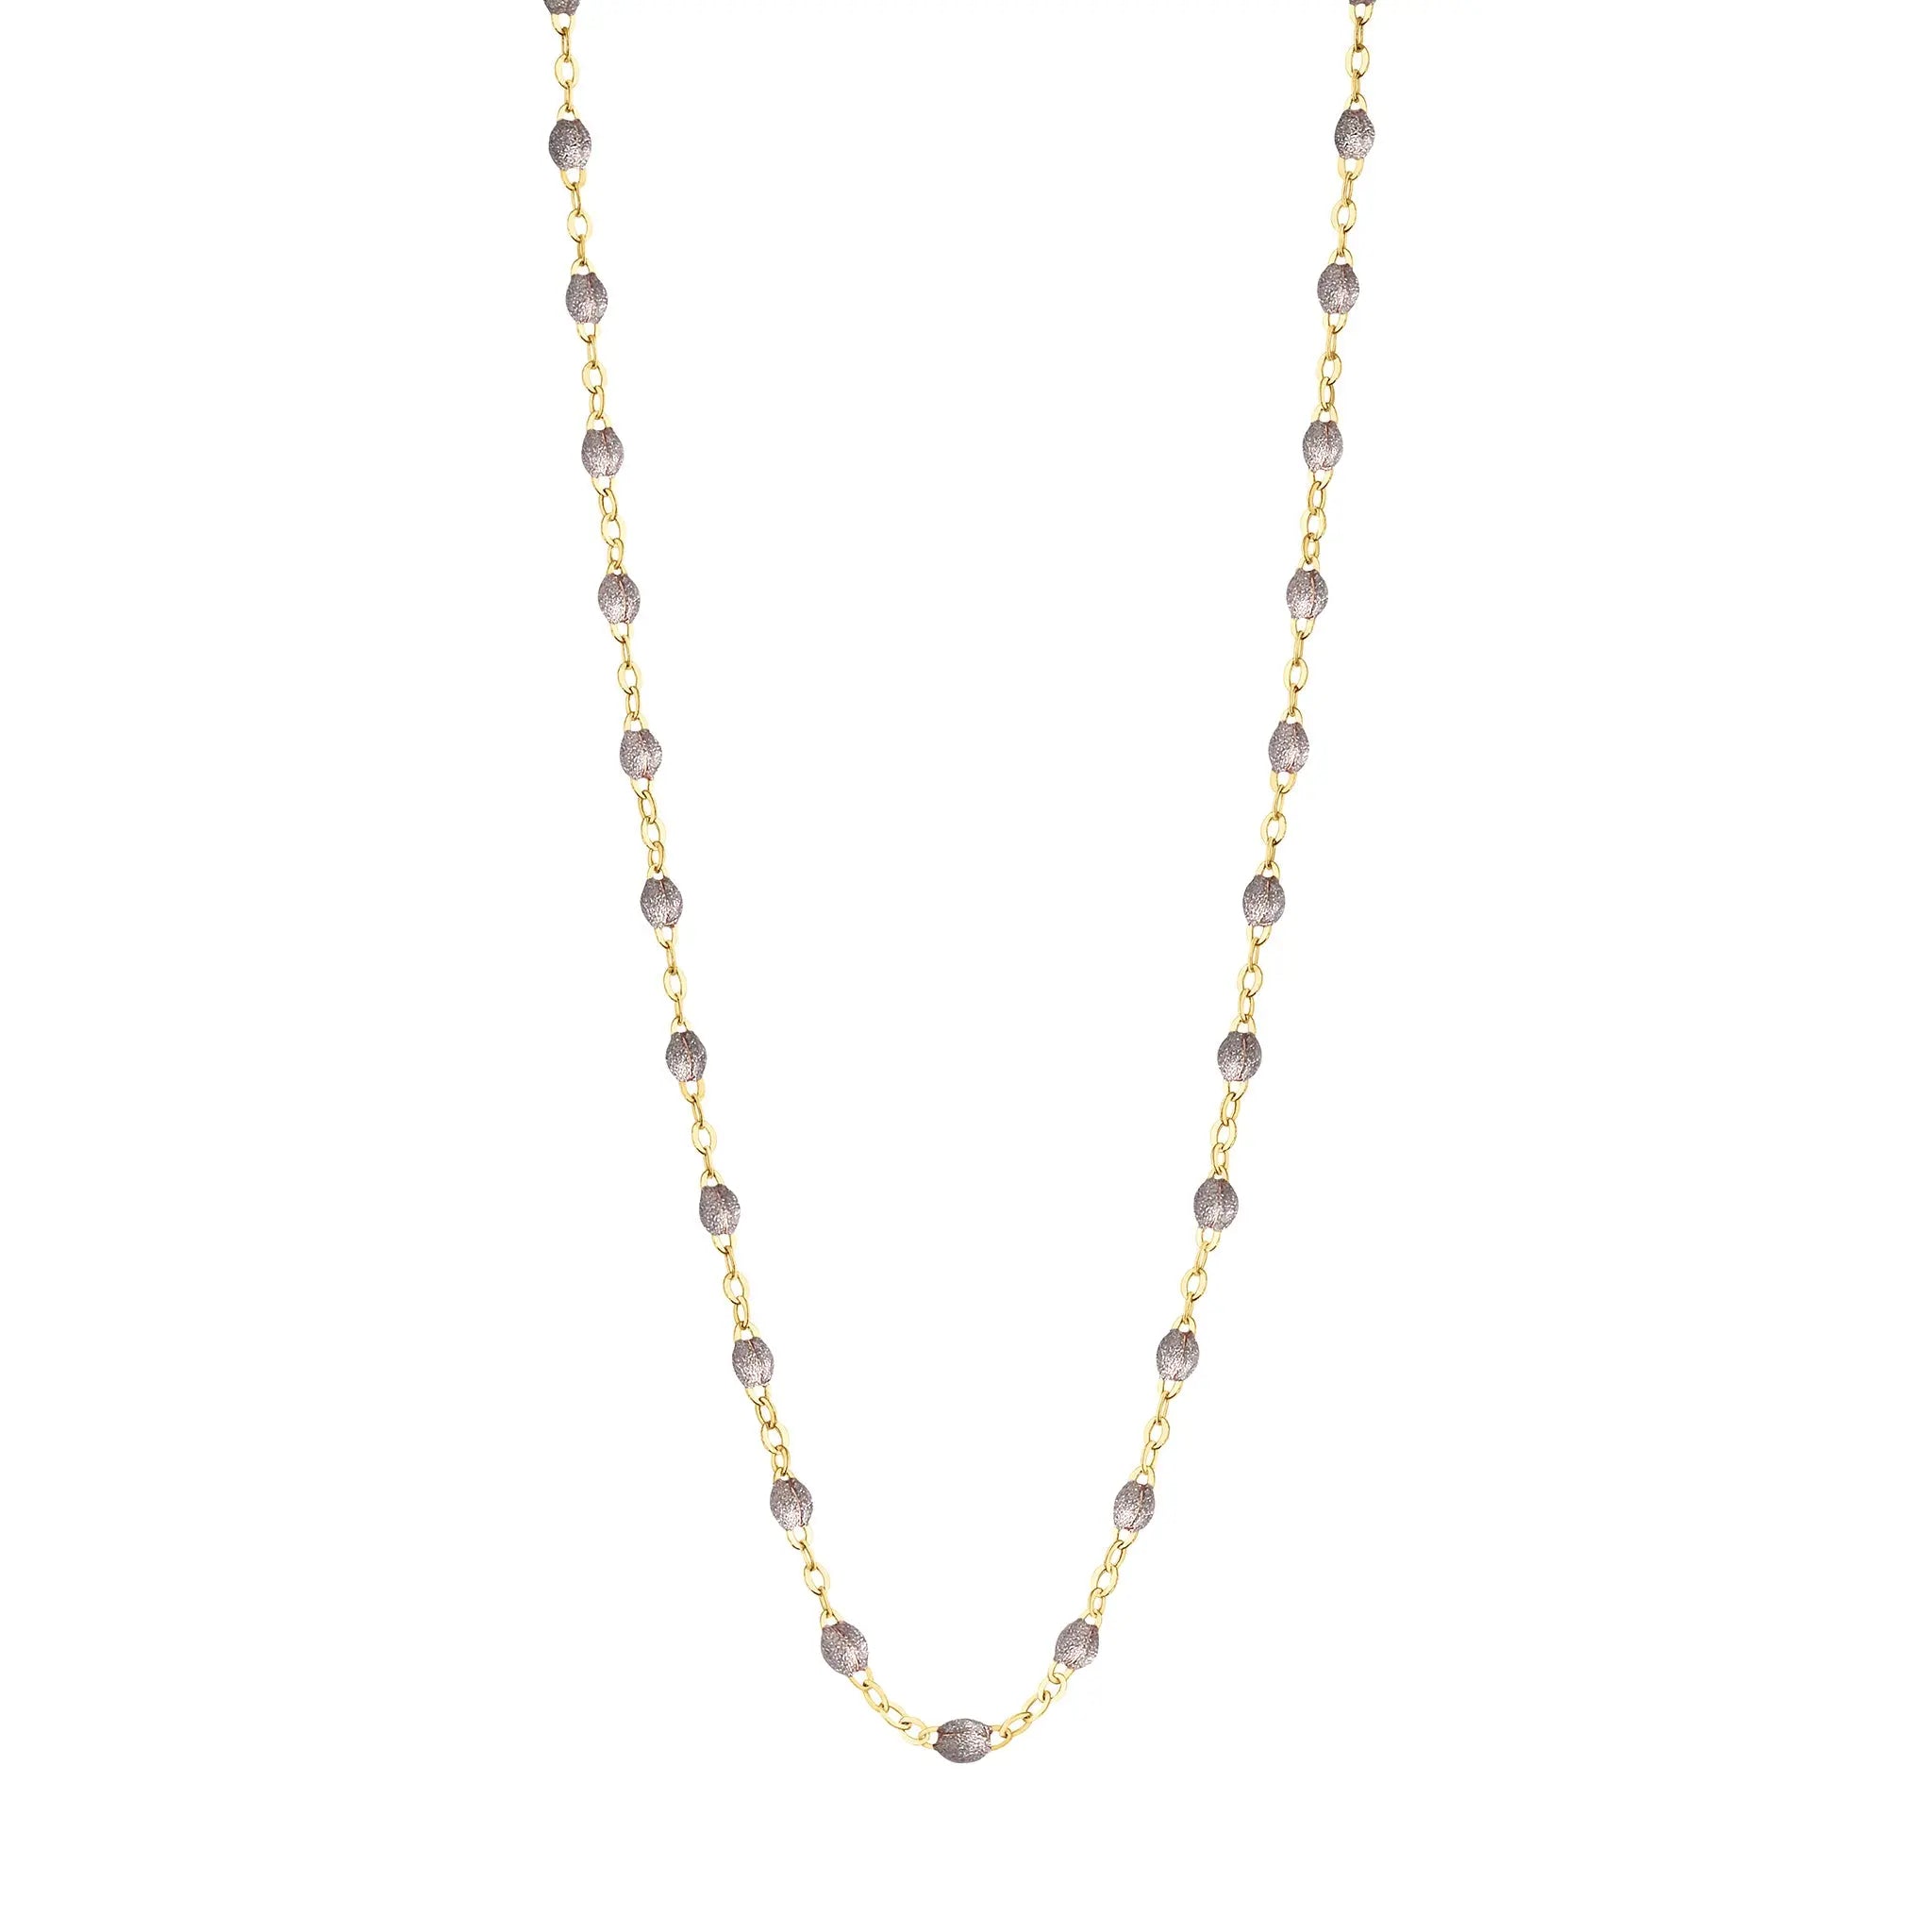 Stack you necklace layers with this versatile beaded chain! The Classic Gigi Necklace by gigi CLOZEAU features 18 carat yellow gold, and striking Silver resin jewels for an everyday effortless appearance. Handcrafted in 18k yellow gold. The beads measure 1.50mm in diameter and is finished with a spring ring clasp. The length is 16.5 inches.